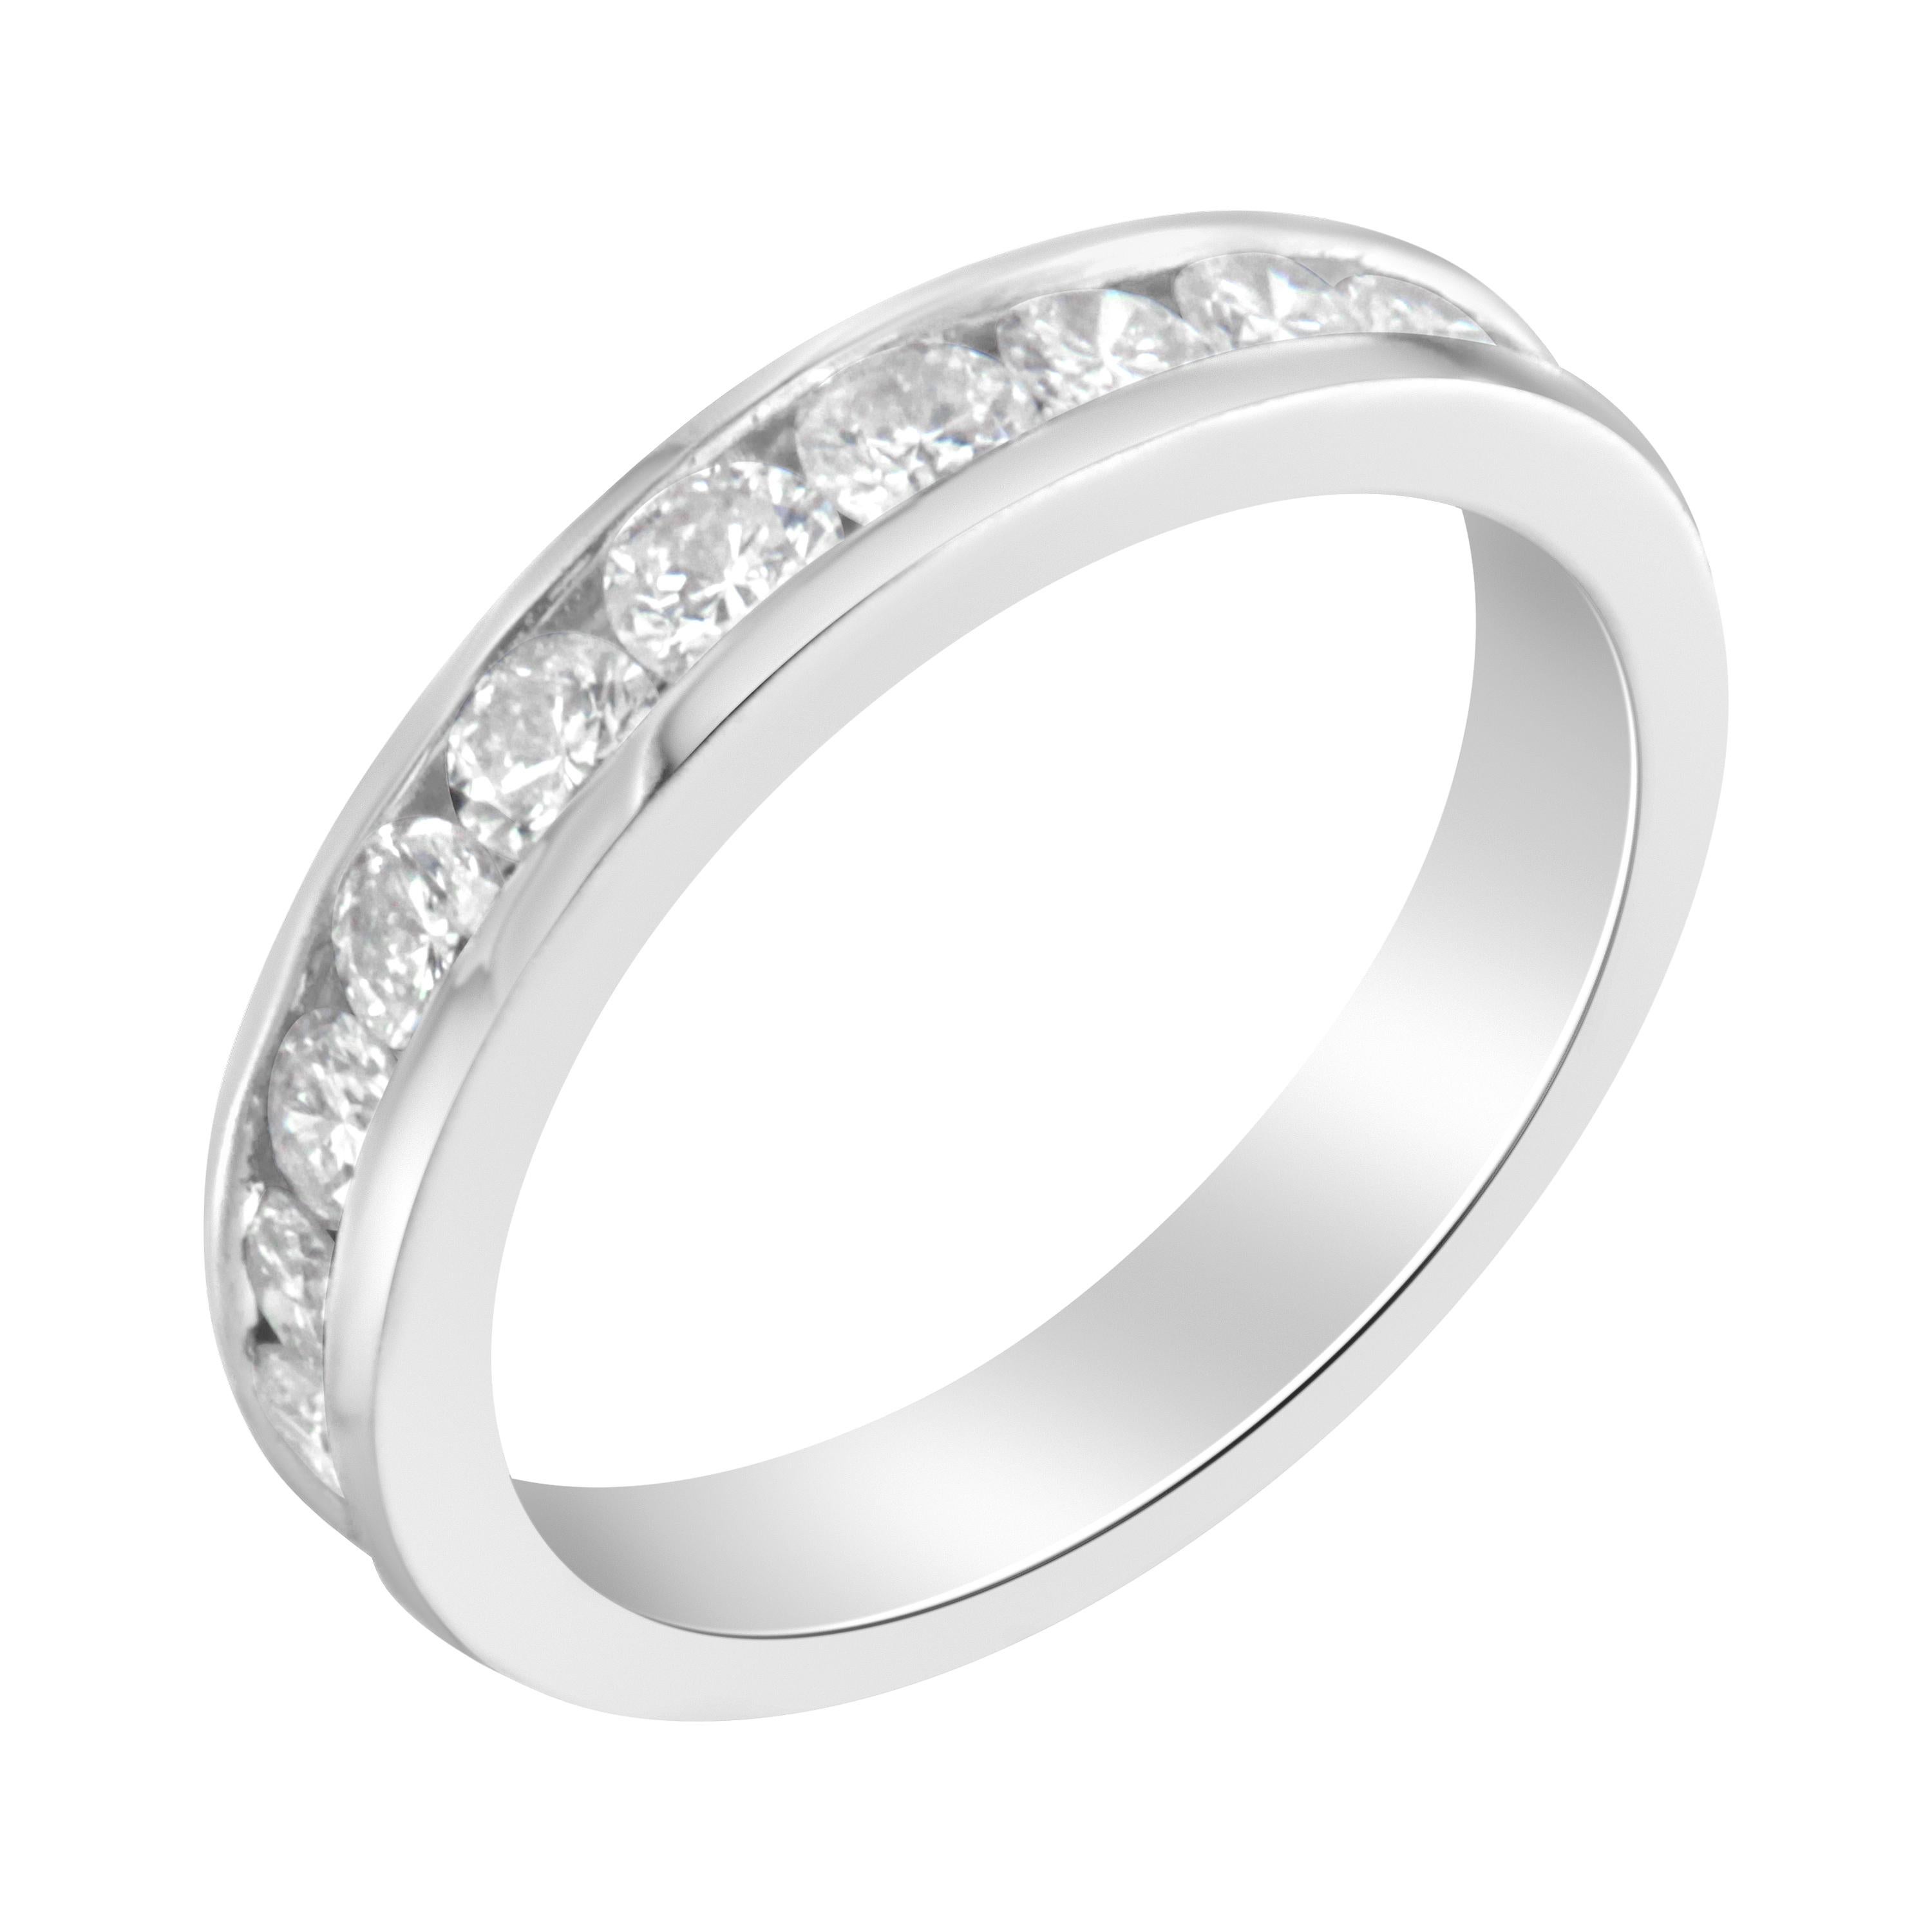 This diamond semi-eternity band features a row of brilliant cut round diamonds channel set in an 18 karat white gold band. There are 11 natural, round-cut diamonds for a total weight of 1 carat. Each band comes with a certificate from IGI for added